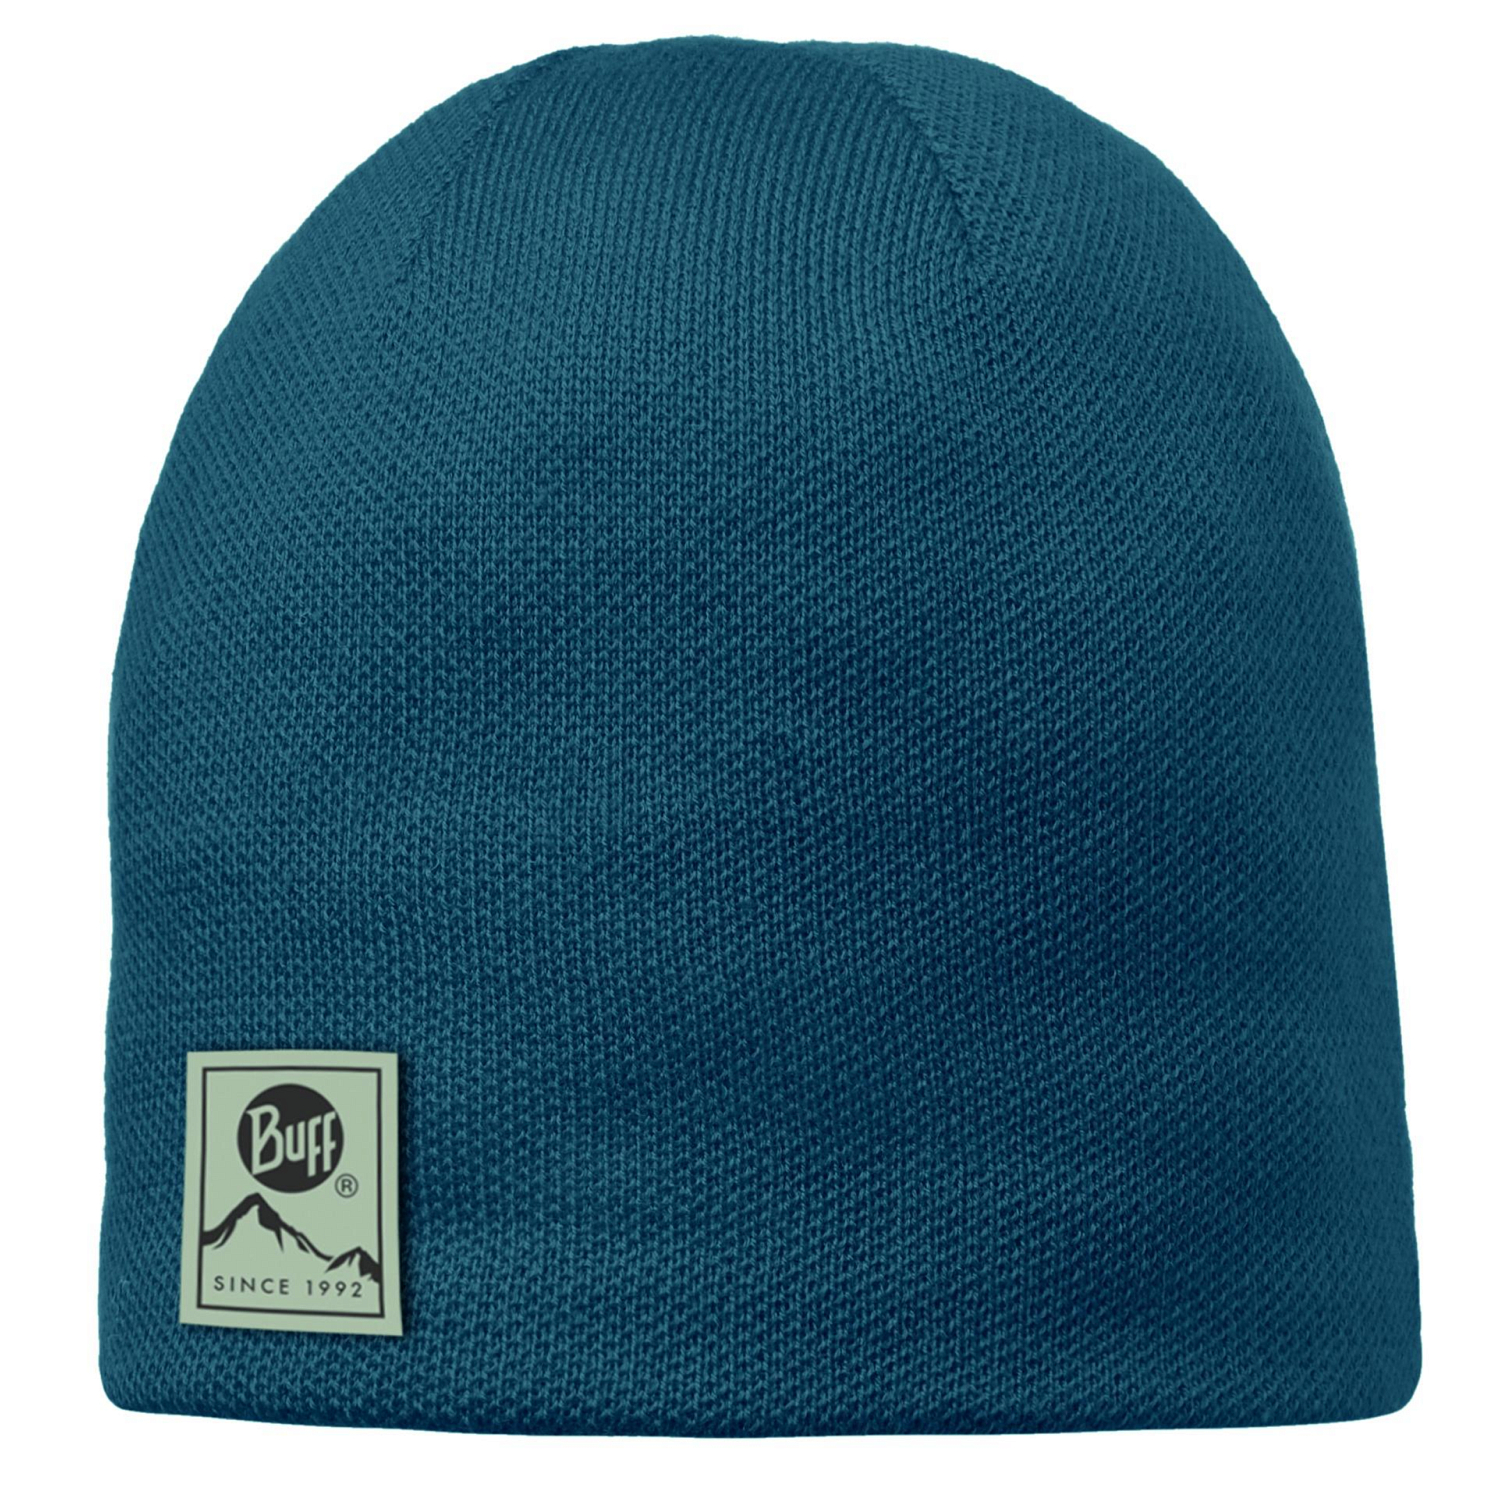 Шапка Buff KNITTED HATS BUFF SOLID OCEAN